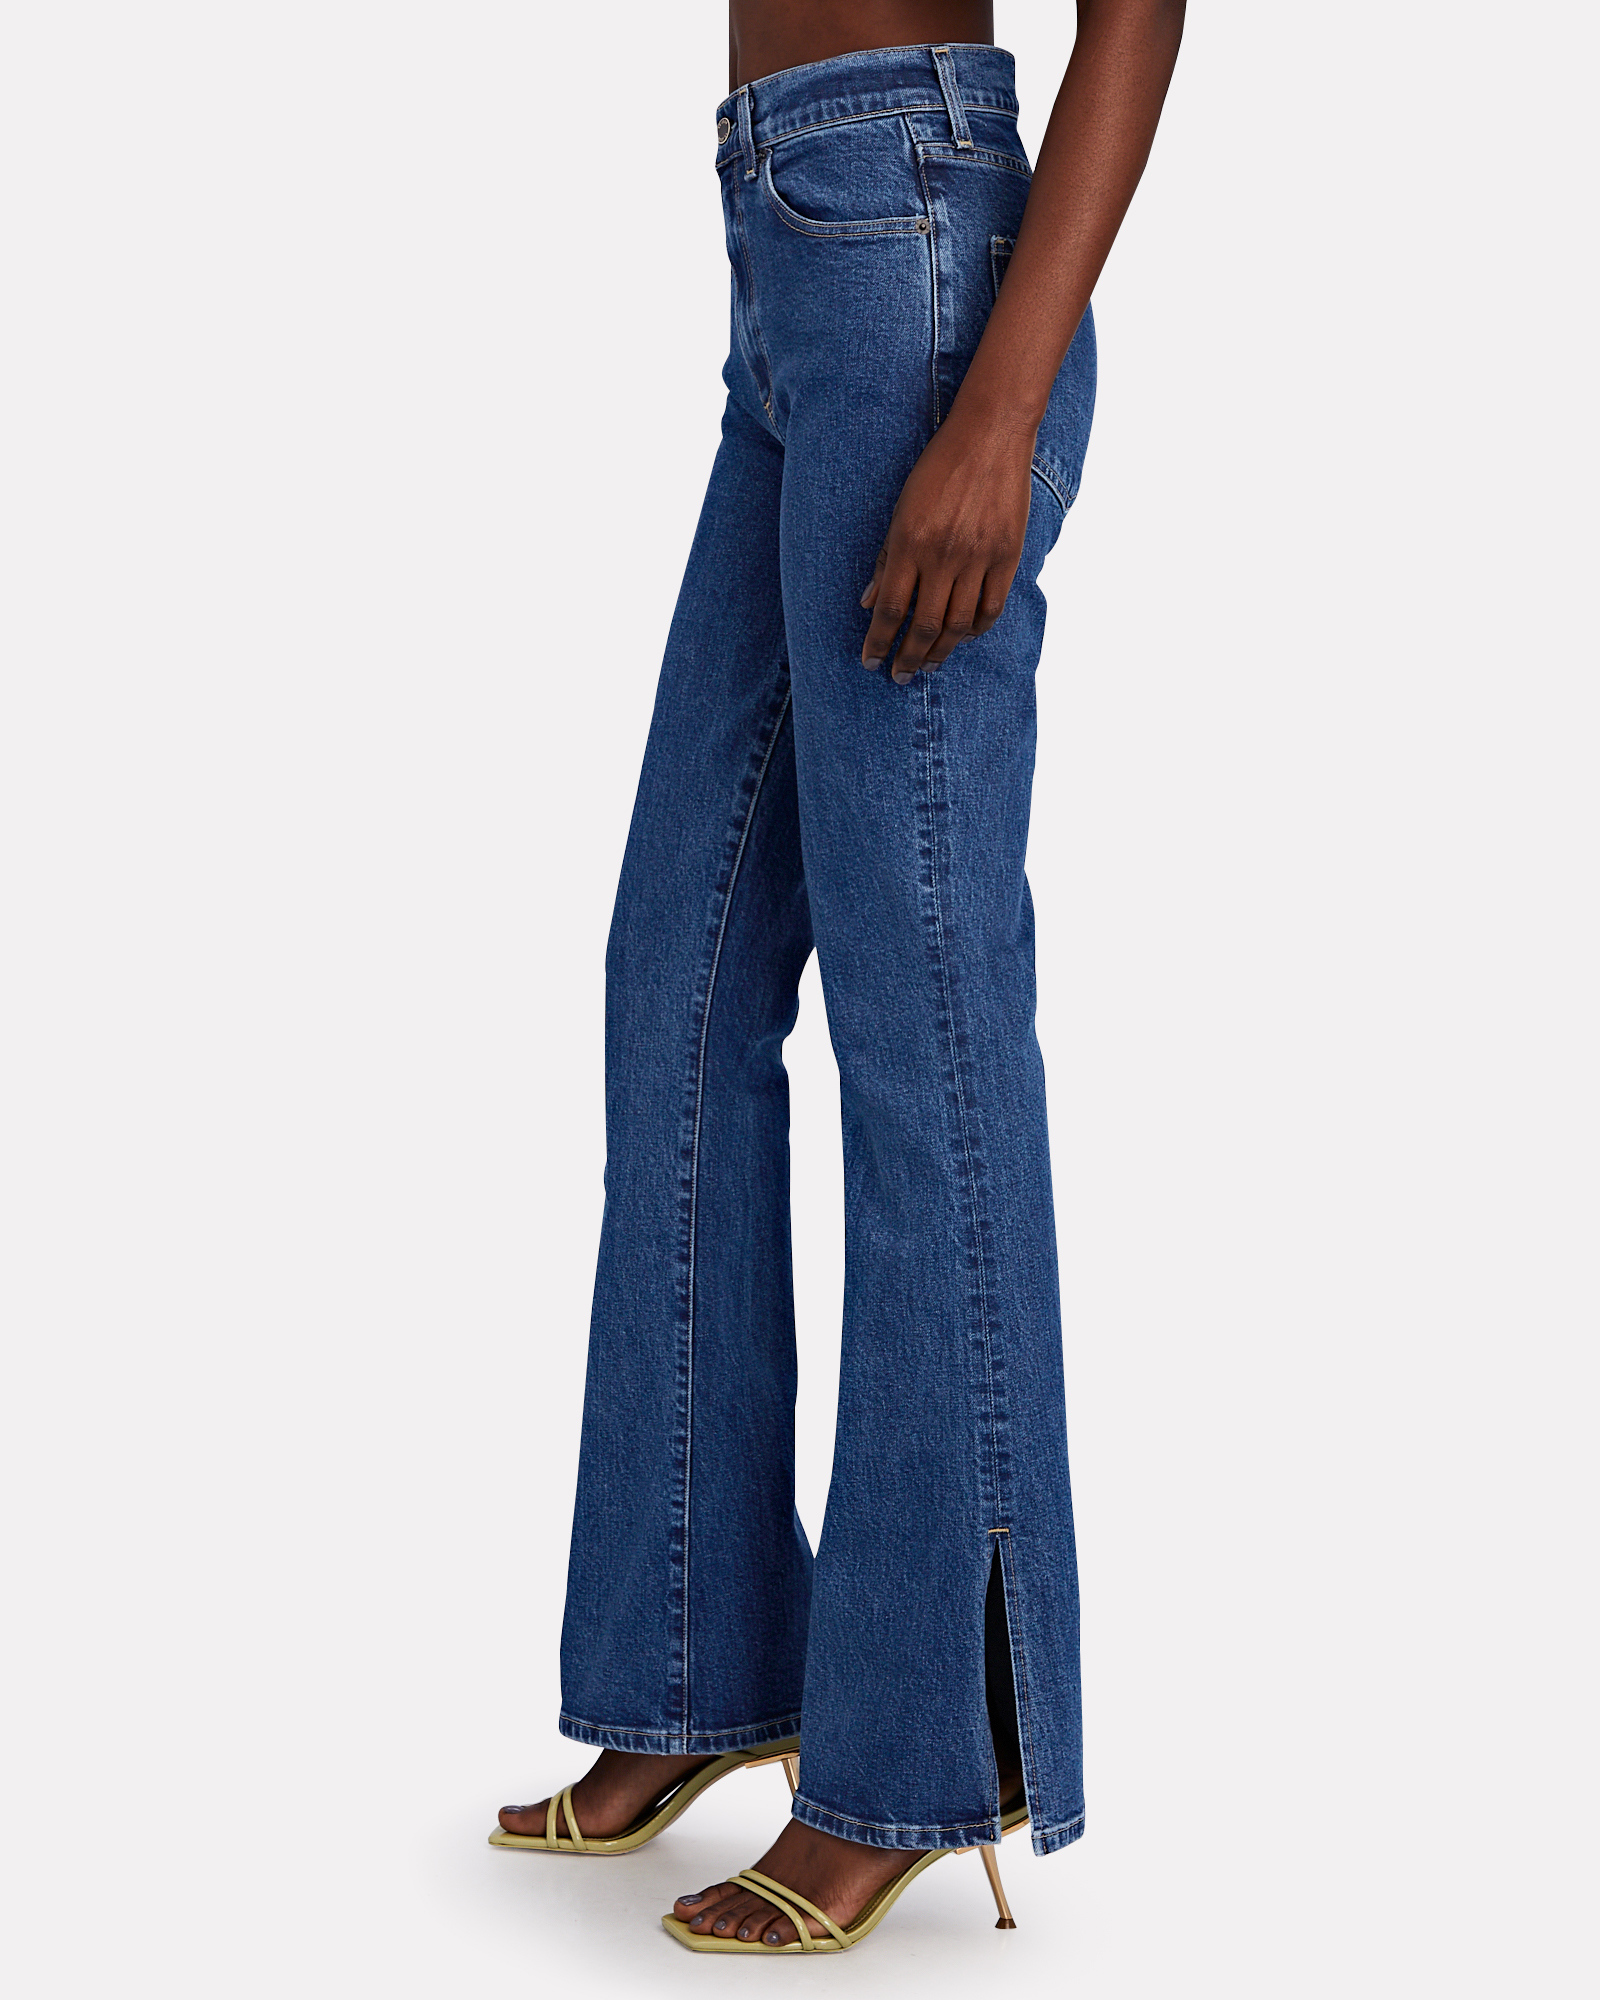 Le Jean Denim Stella Flare Jeans in Blue Womens Clothing Jeans Flare and bell bottom jeans 